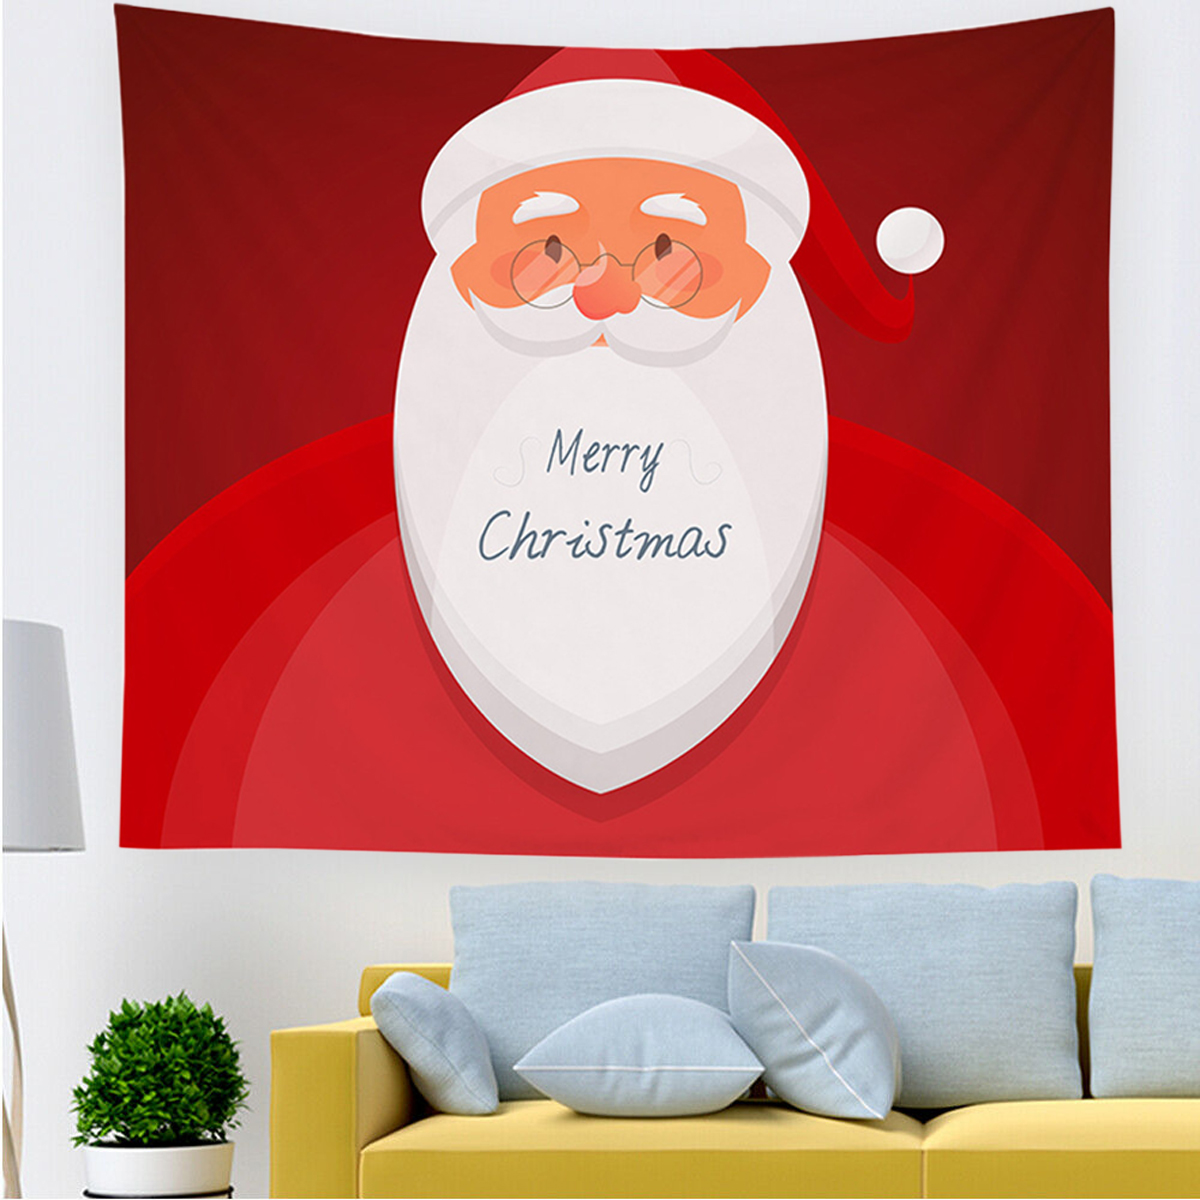 Christmas-Hanging-Cloth-Custom-Red-Santa-Claus-Bedside-Photography-Background-Cloth-Wall-Bedside-Dec-1749899-2